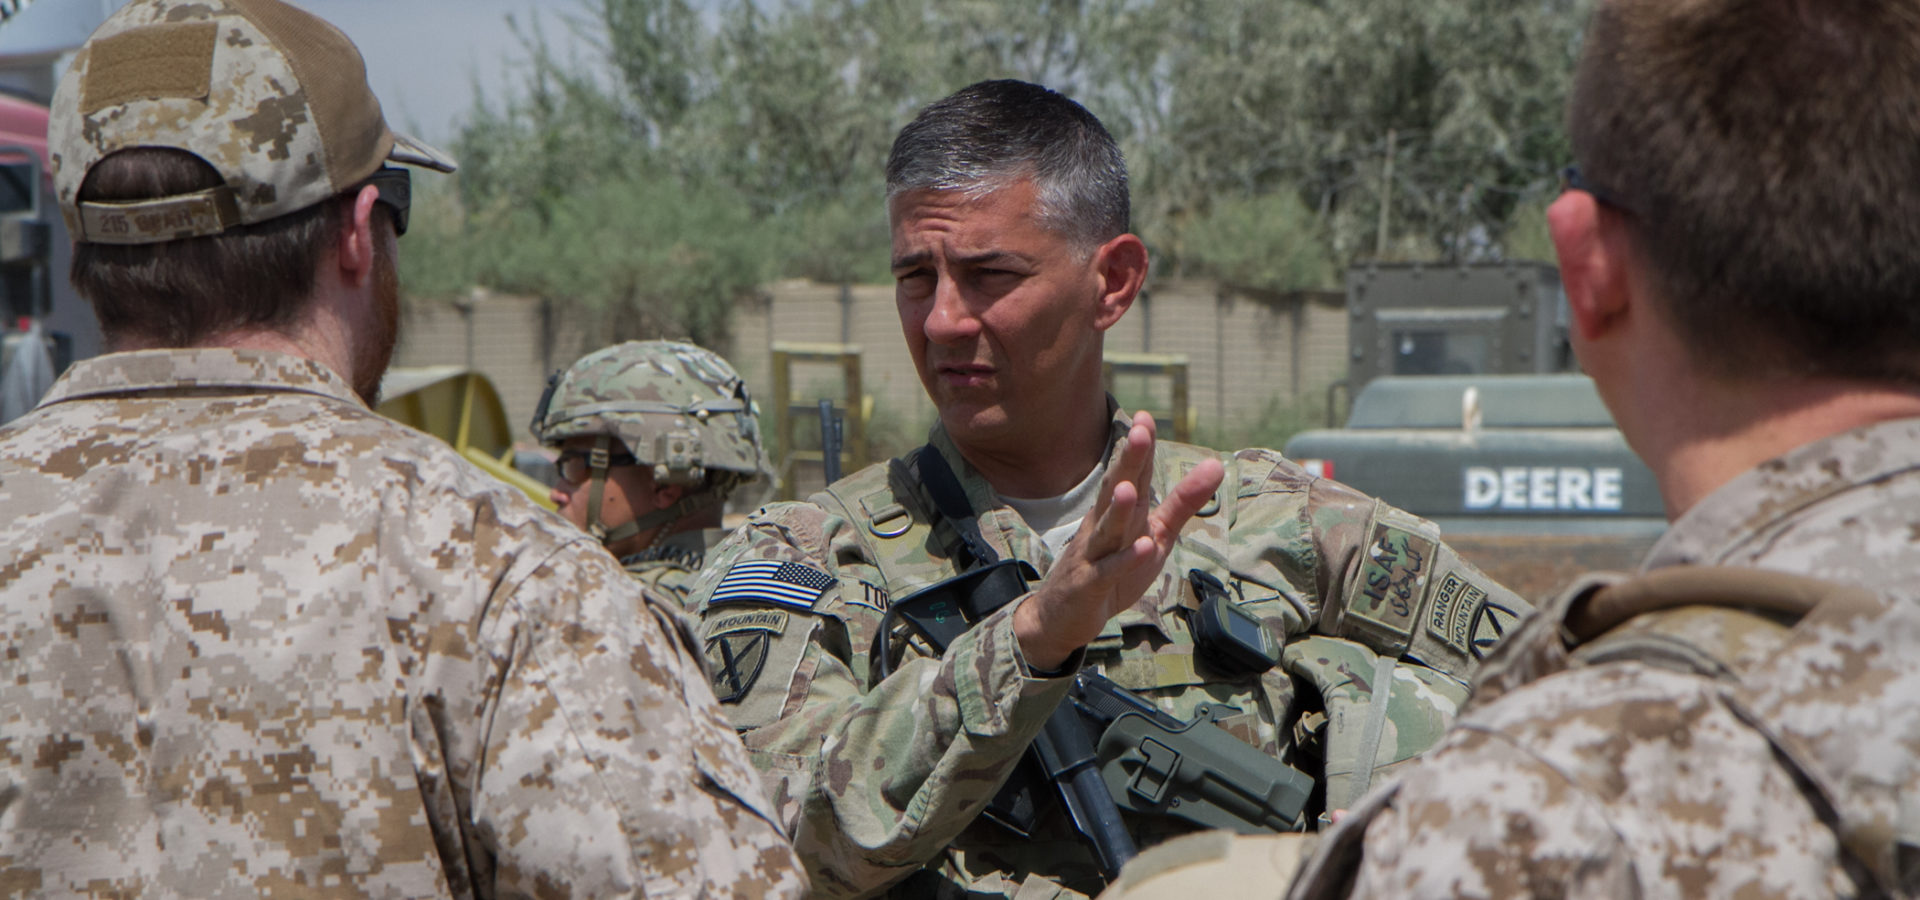 U.S. Army Maj. Gen. Stephen Townsend, the commander of Combined Joint Task Force 10 and Regional Command East, speaks with Service members during a visit to Baraki Barak, Logar province, Afghanistan, Aug. 25, 2014. (U.S. Army photo by Master Sgt. Kap Kim/Released)